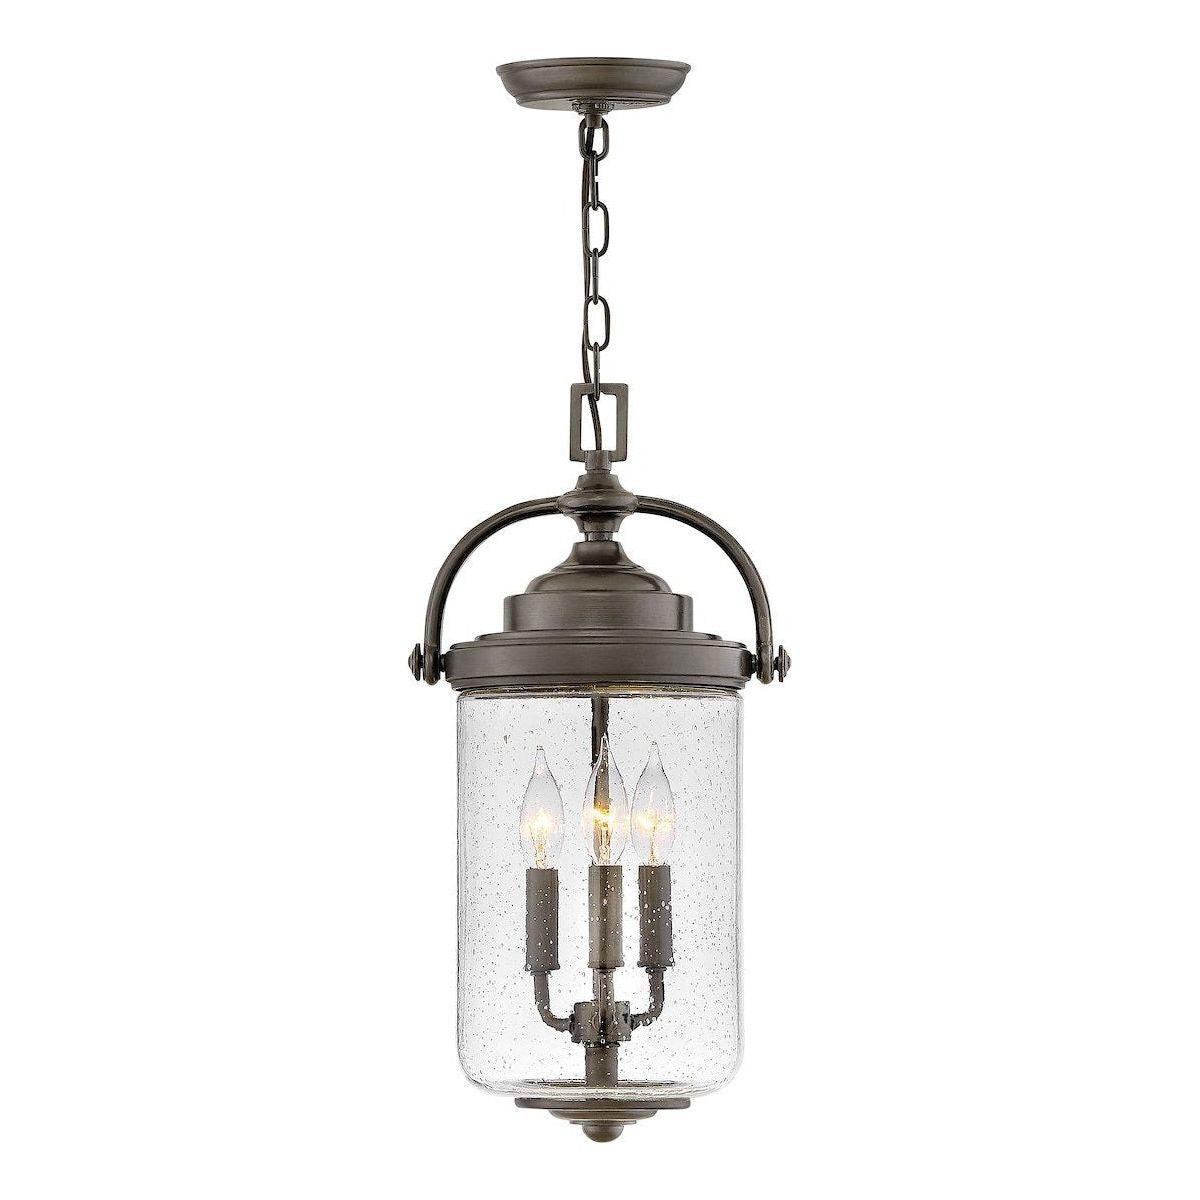 Hinkley - Willoughby Outdoor Pendant - Lights Canada